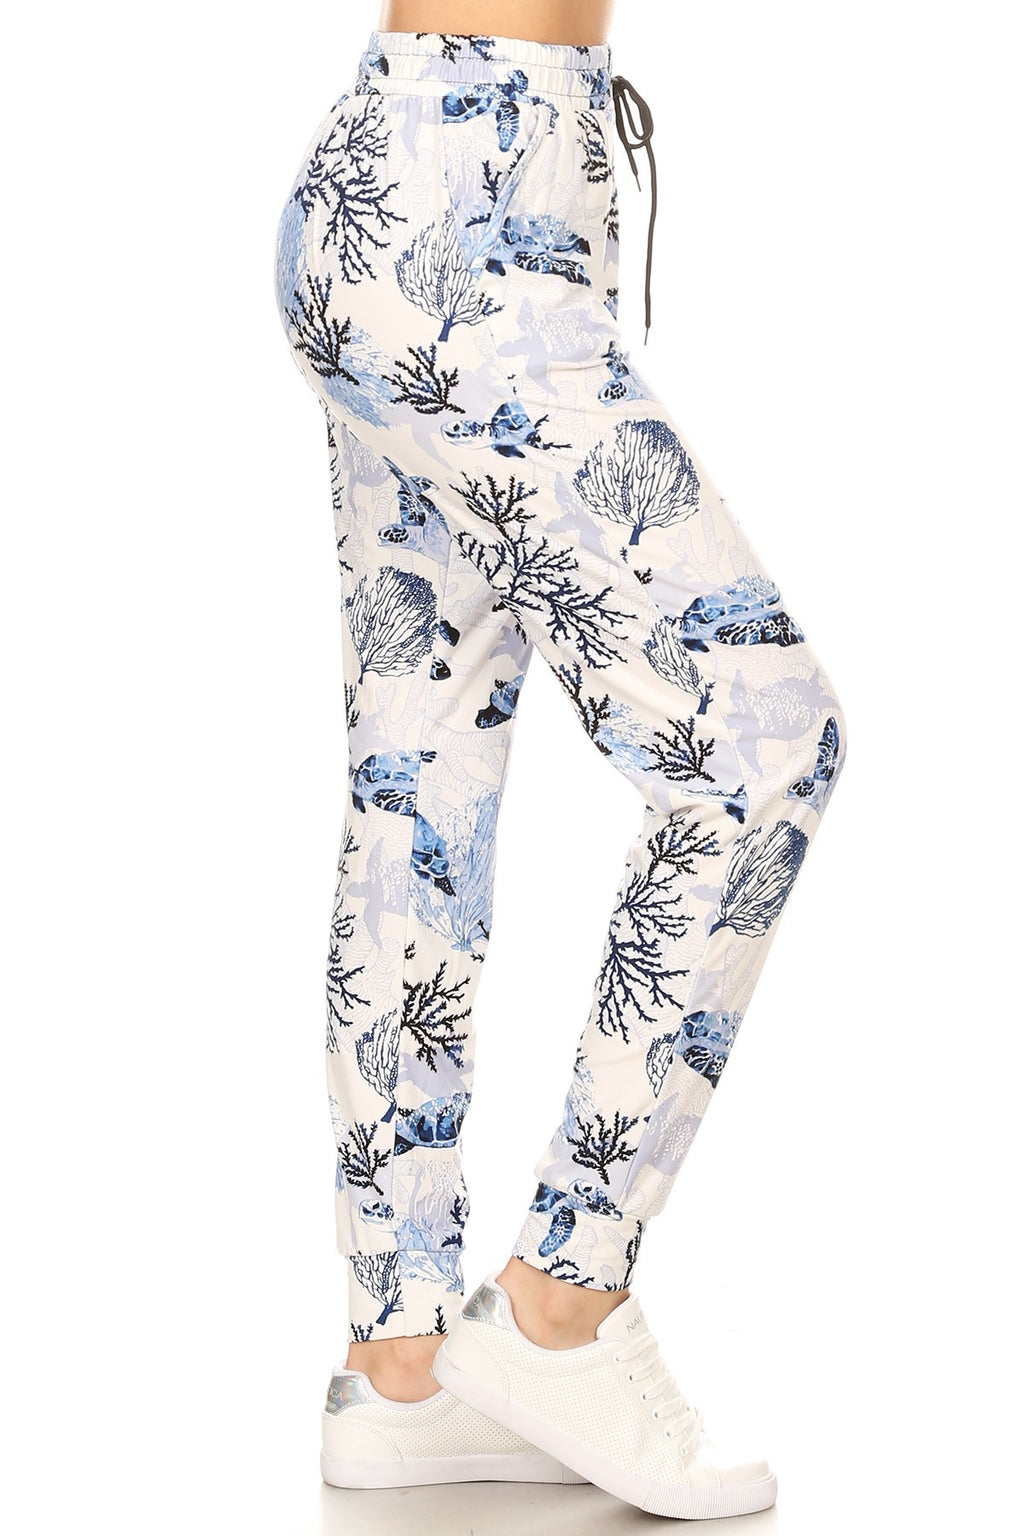 CORAL REEF AND TURTLE printed joggers with solid trim, drawstring waistband, waist pockets, and cuffed hems